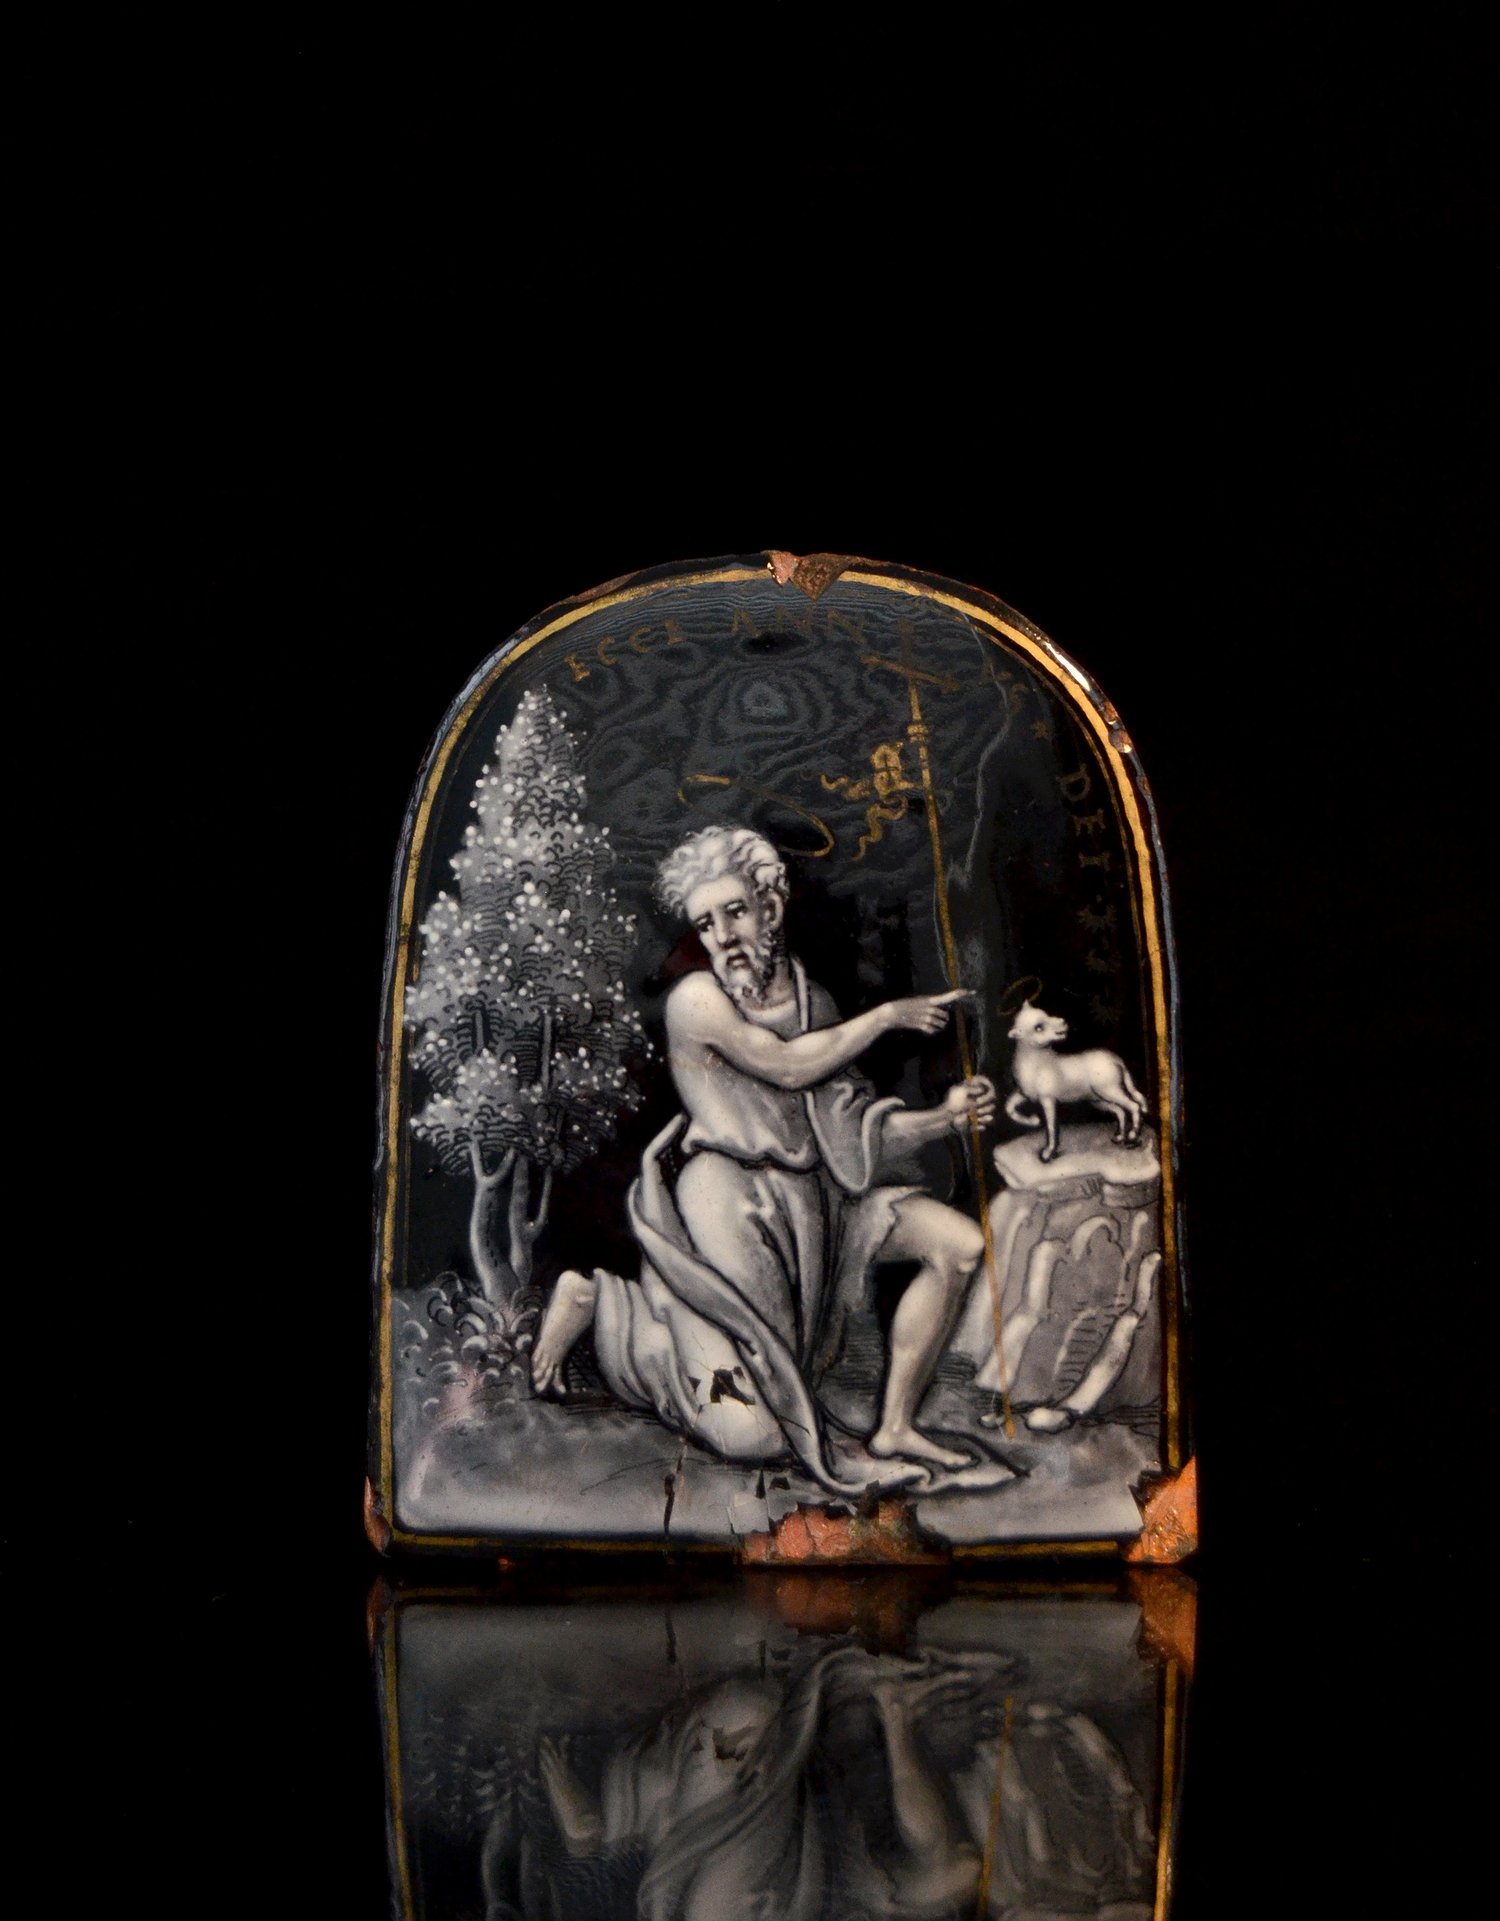 Image of A rare autograph Limoges enamel of John the Baptist by Pierre Reymond or workshop